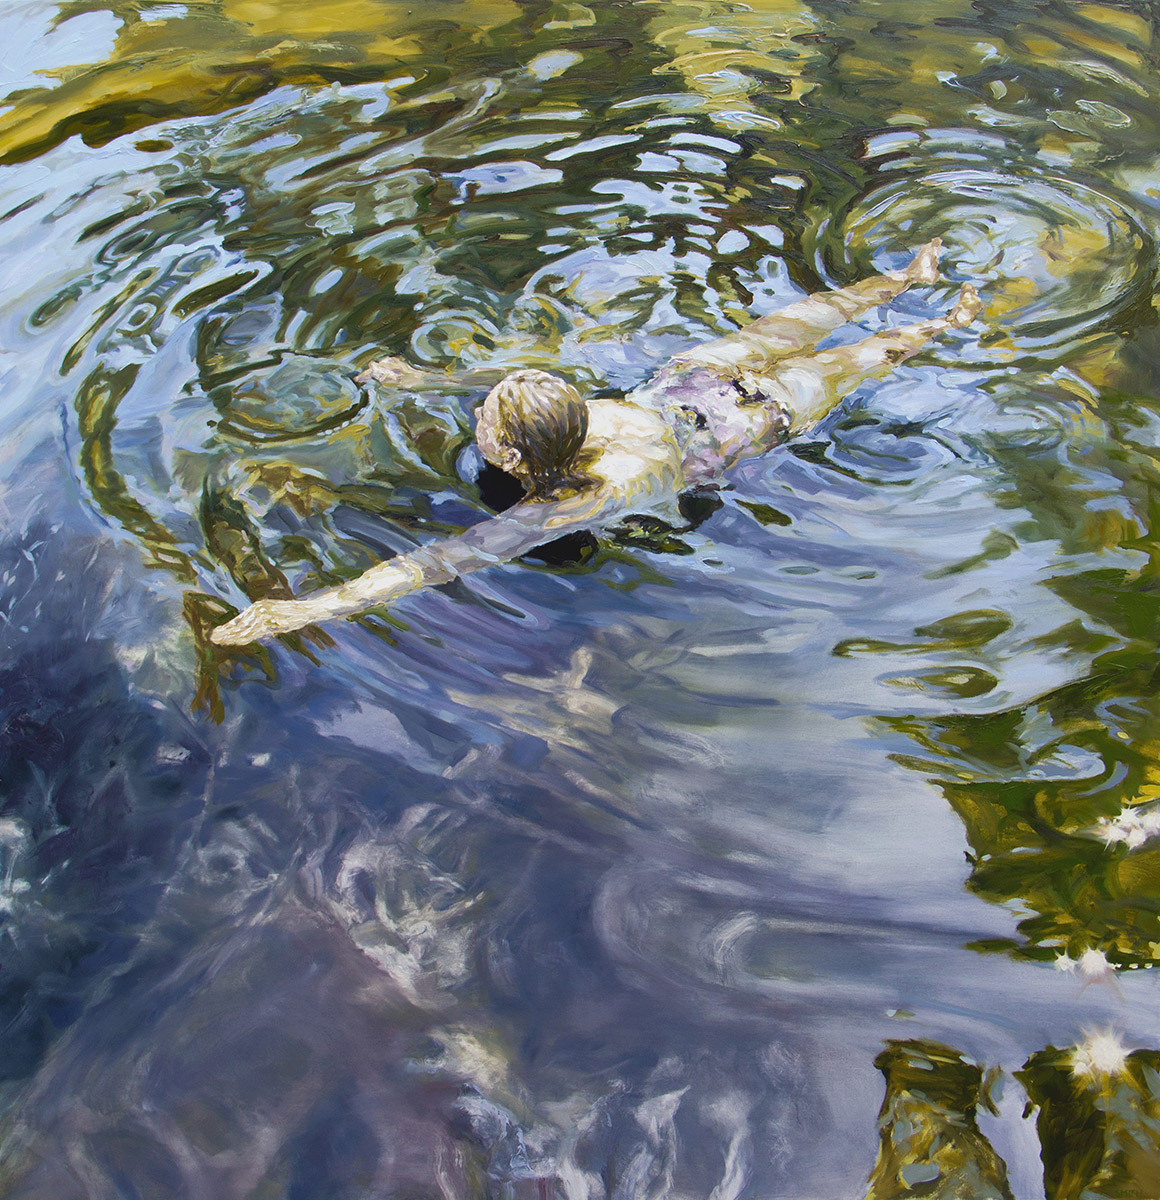 Painting of a girl swimming in a lake in the direction of the viewer. Trees and vegetation are reflected in the rippled surface of the water.